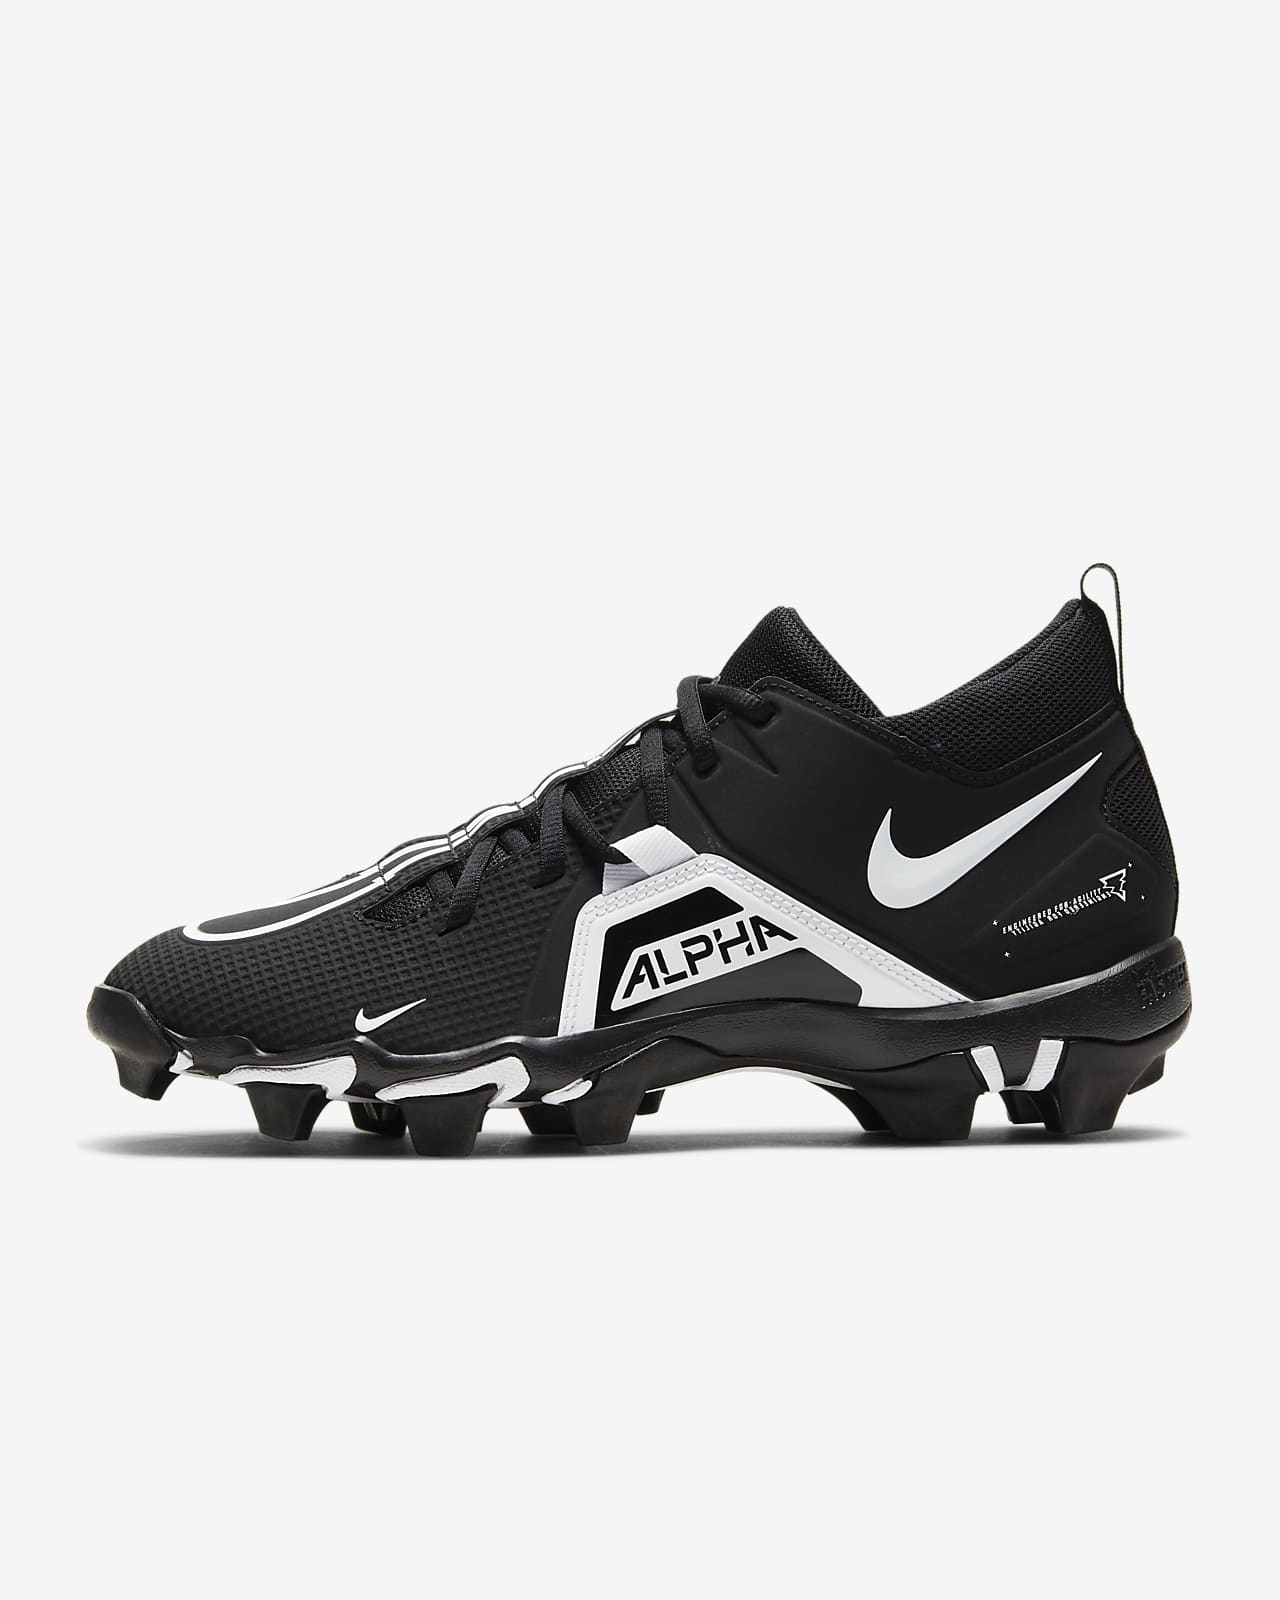 nike highlight cleats